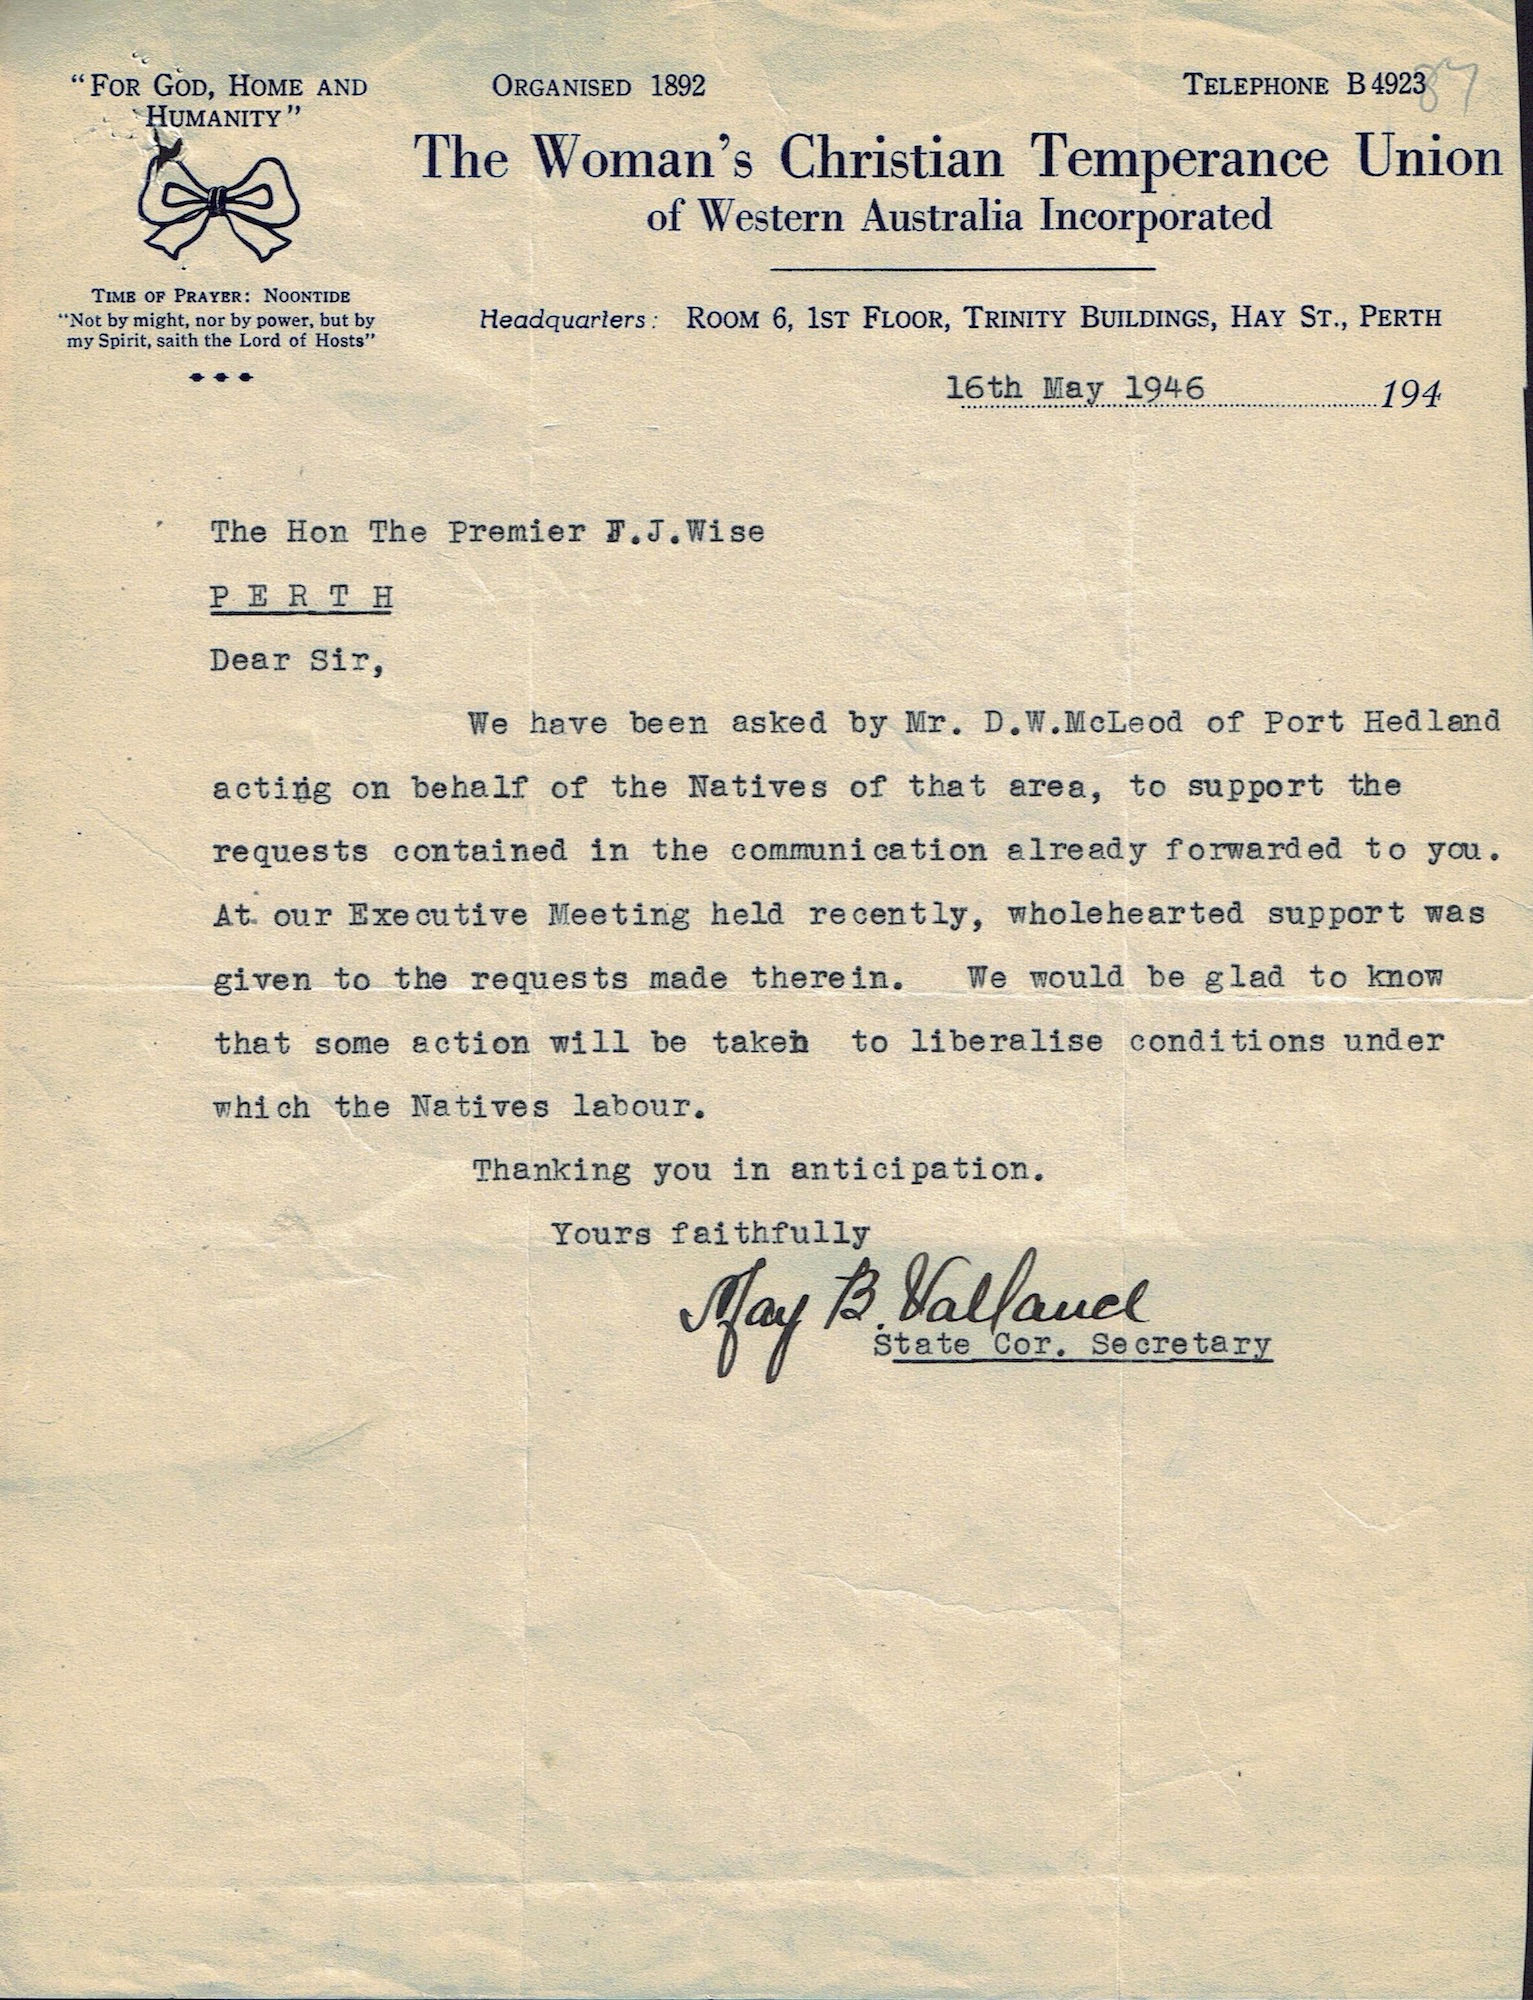 Woman's Christian Temperance Union WA to Premier Wise, 16 May 1946